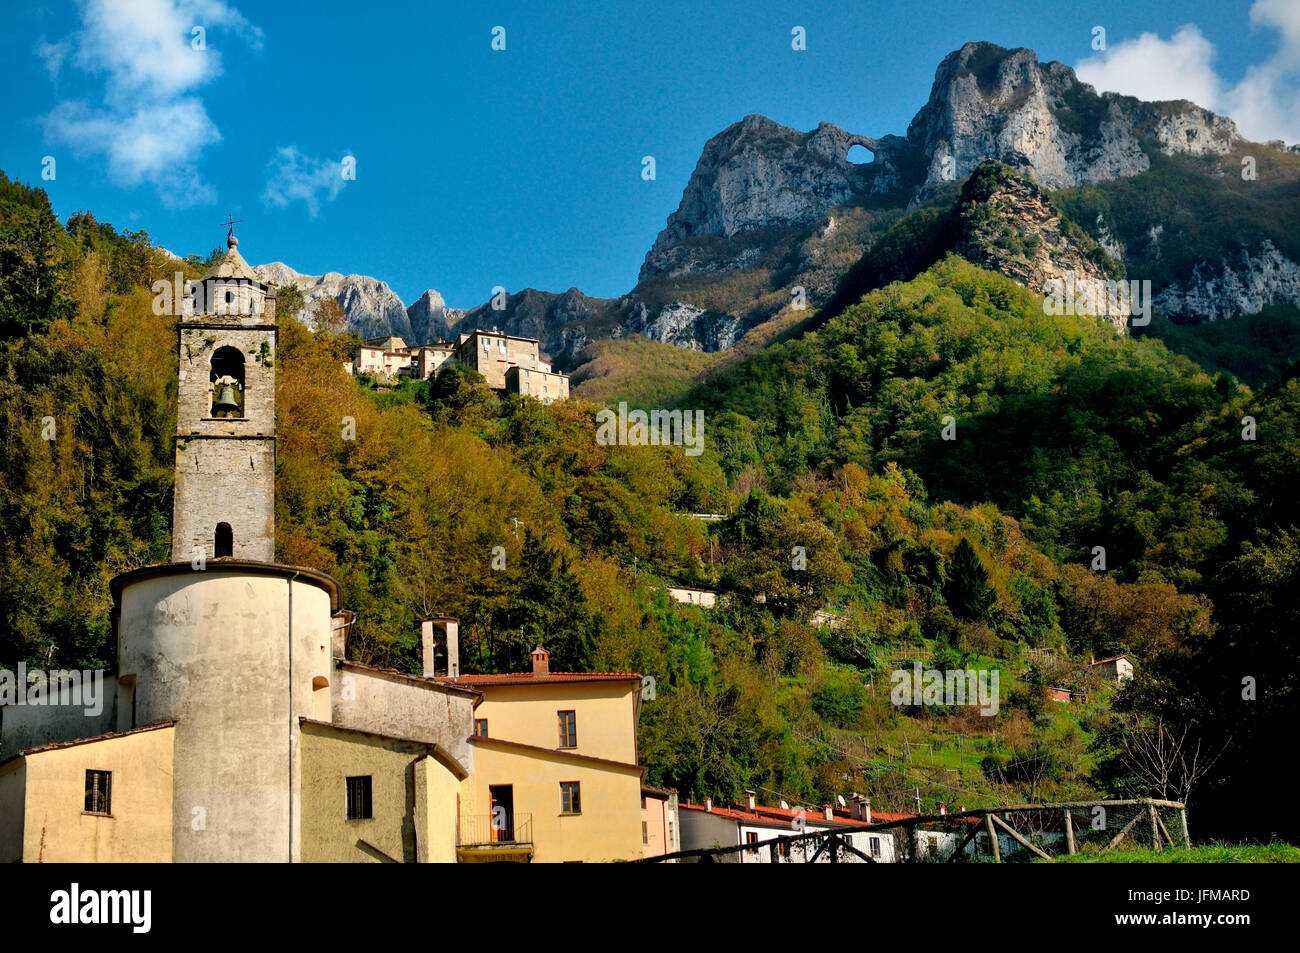 The village of Cardoso, with the view of the beautiful nature of the Park Forato, in the Apuan Alps, Stock Photo